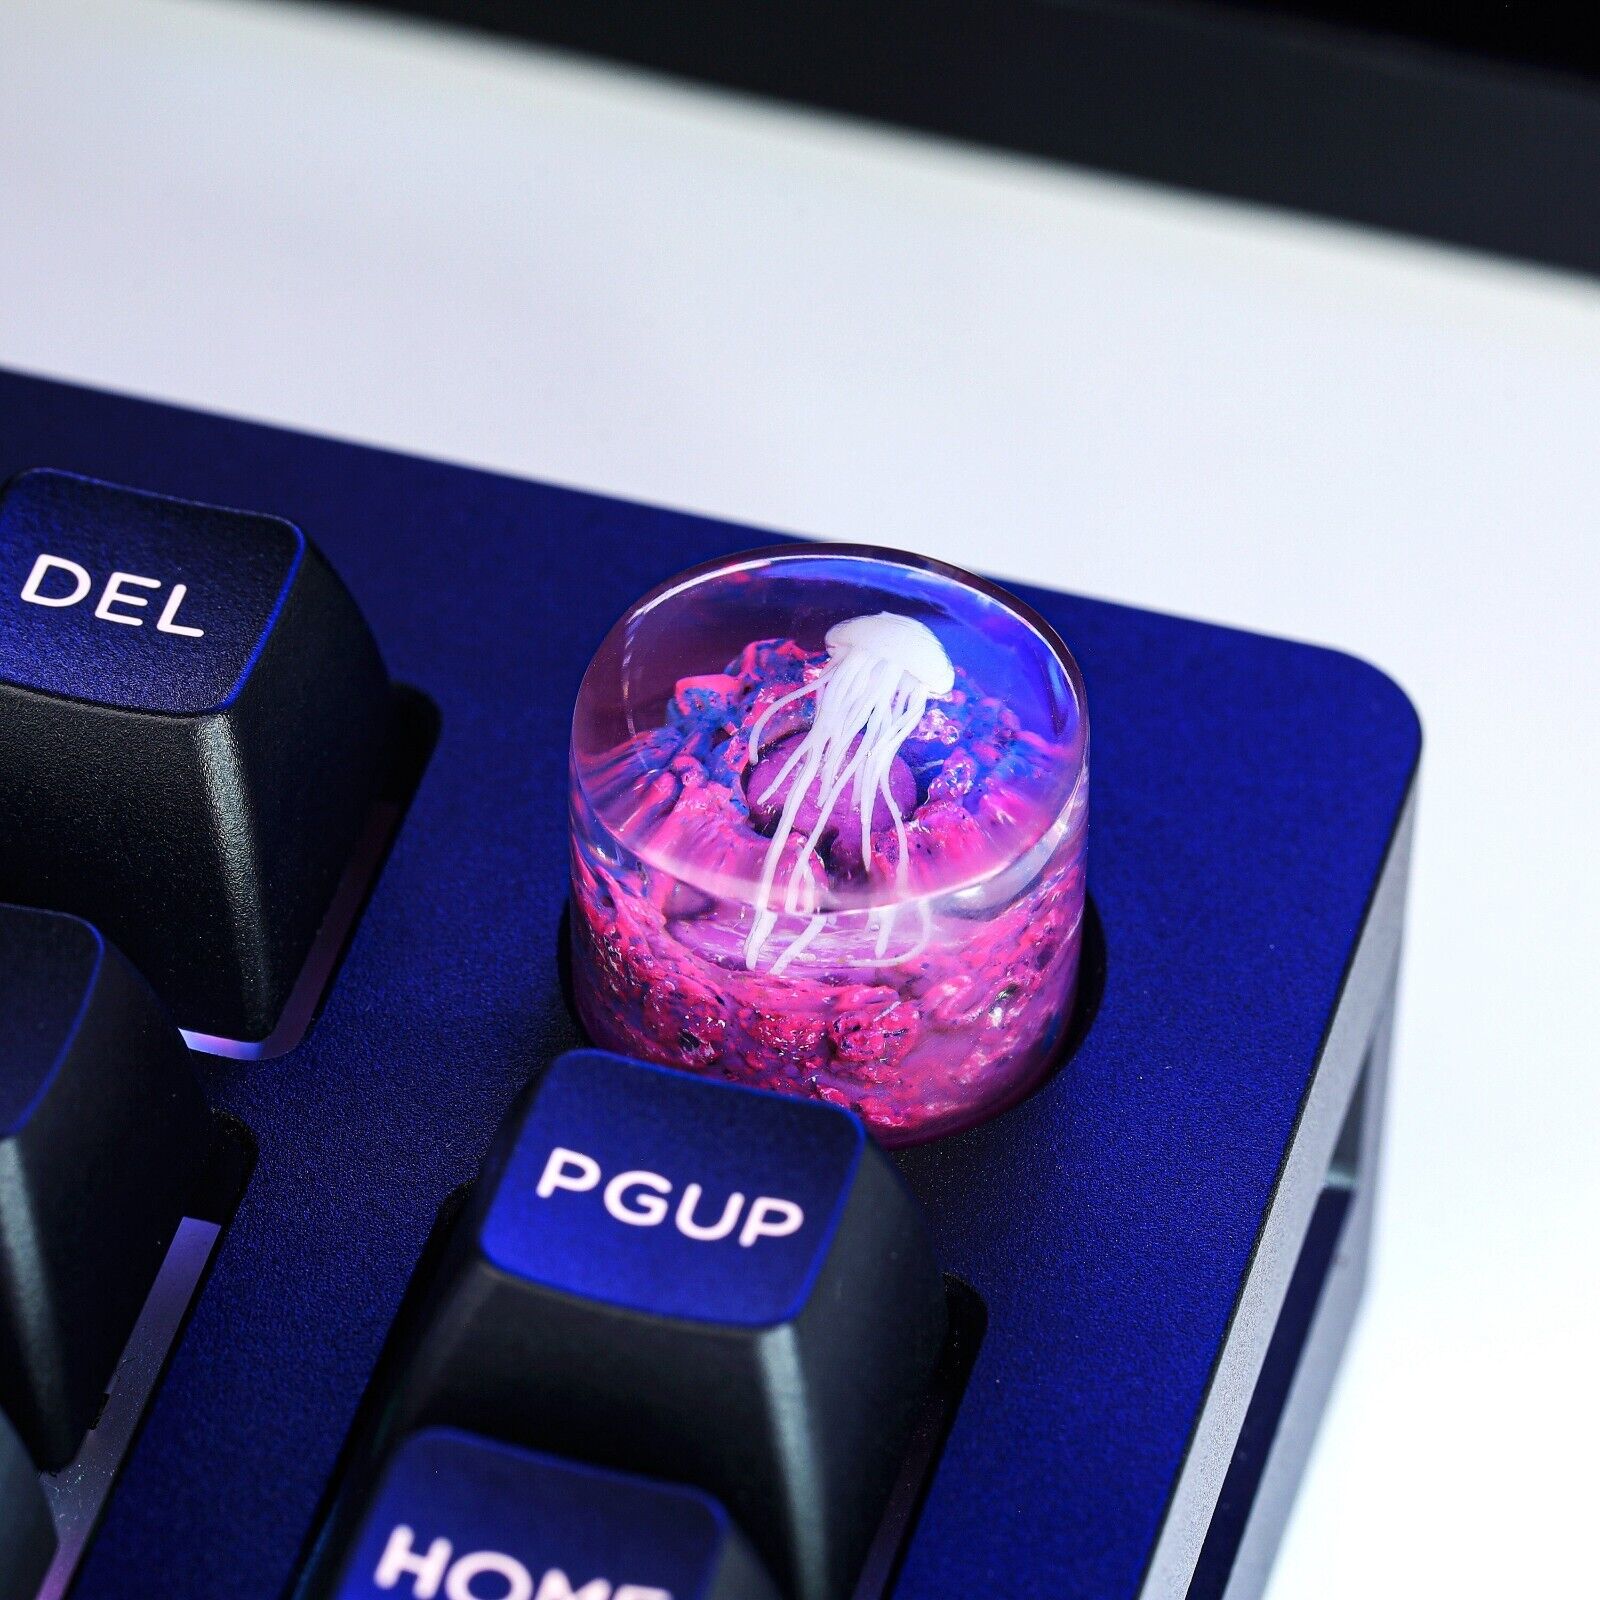 Jellyfish Gaming Knobs, Colorful Knobs Blue And Pink Jellyfish keycap, GMK rare